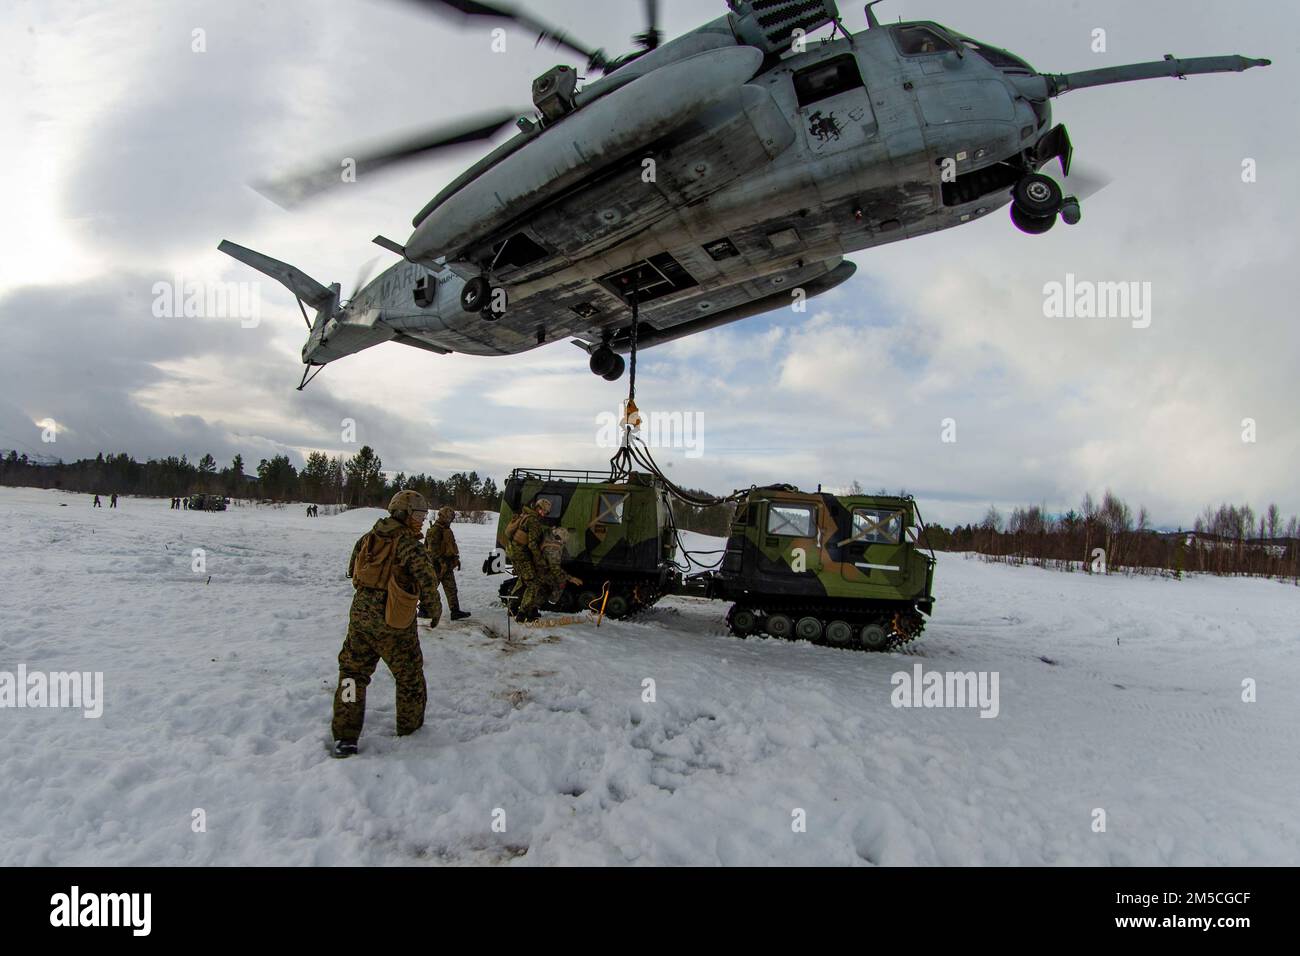 U.S. Marines with 2nd Landing Support Battalion, assigned to 3rd Battalion, 6th Marine Regiment, II Marine Expeditionary Force, prepare a Norwegian Bandvagn 206 for lift by a CH-53E Super Stallion with Marine Heavy Helicopter Squadron 366 (HMH-366), 2nd Marine Aircraft Wing, in preparation for Exercise Cold Response 2022, Bardufoss, Norway, Feb. 28, 2022. Exercise Cold Response '22 is a biennial Norwegian national readiness and defense exercise that takes place across Norway, with participation from each of its military services, as well as from 26 additional North Atlantic Treaty Organization Stock Photo